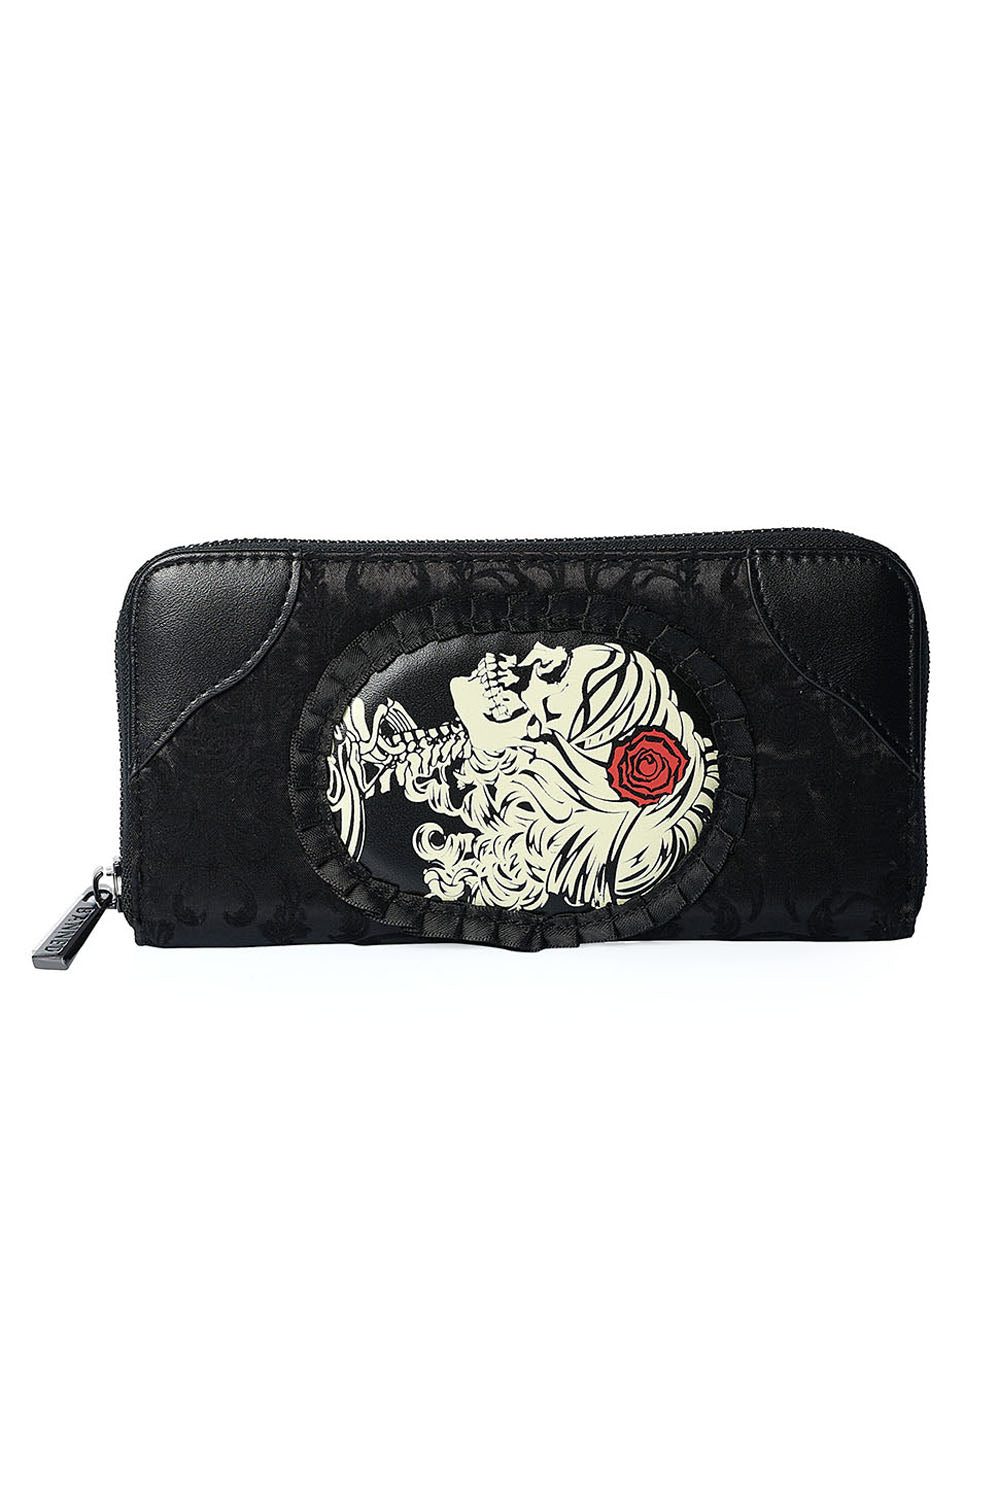 Banned Alternative Vine Black Cameo Lady Lace Wallet